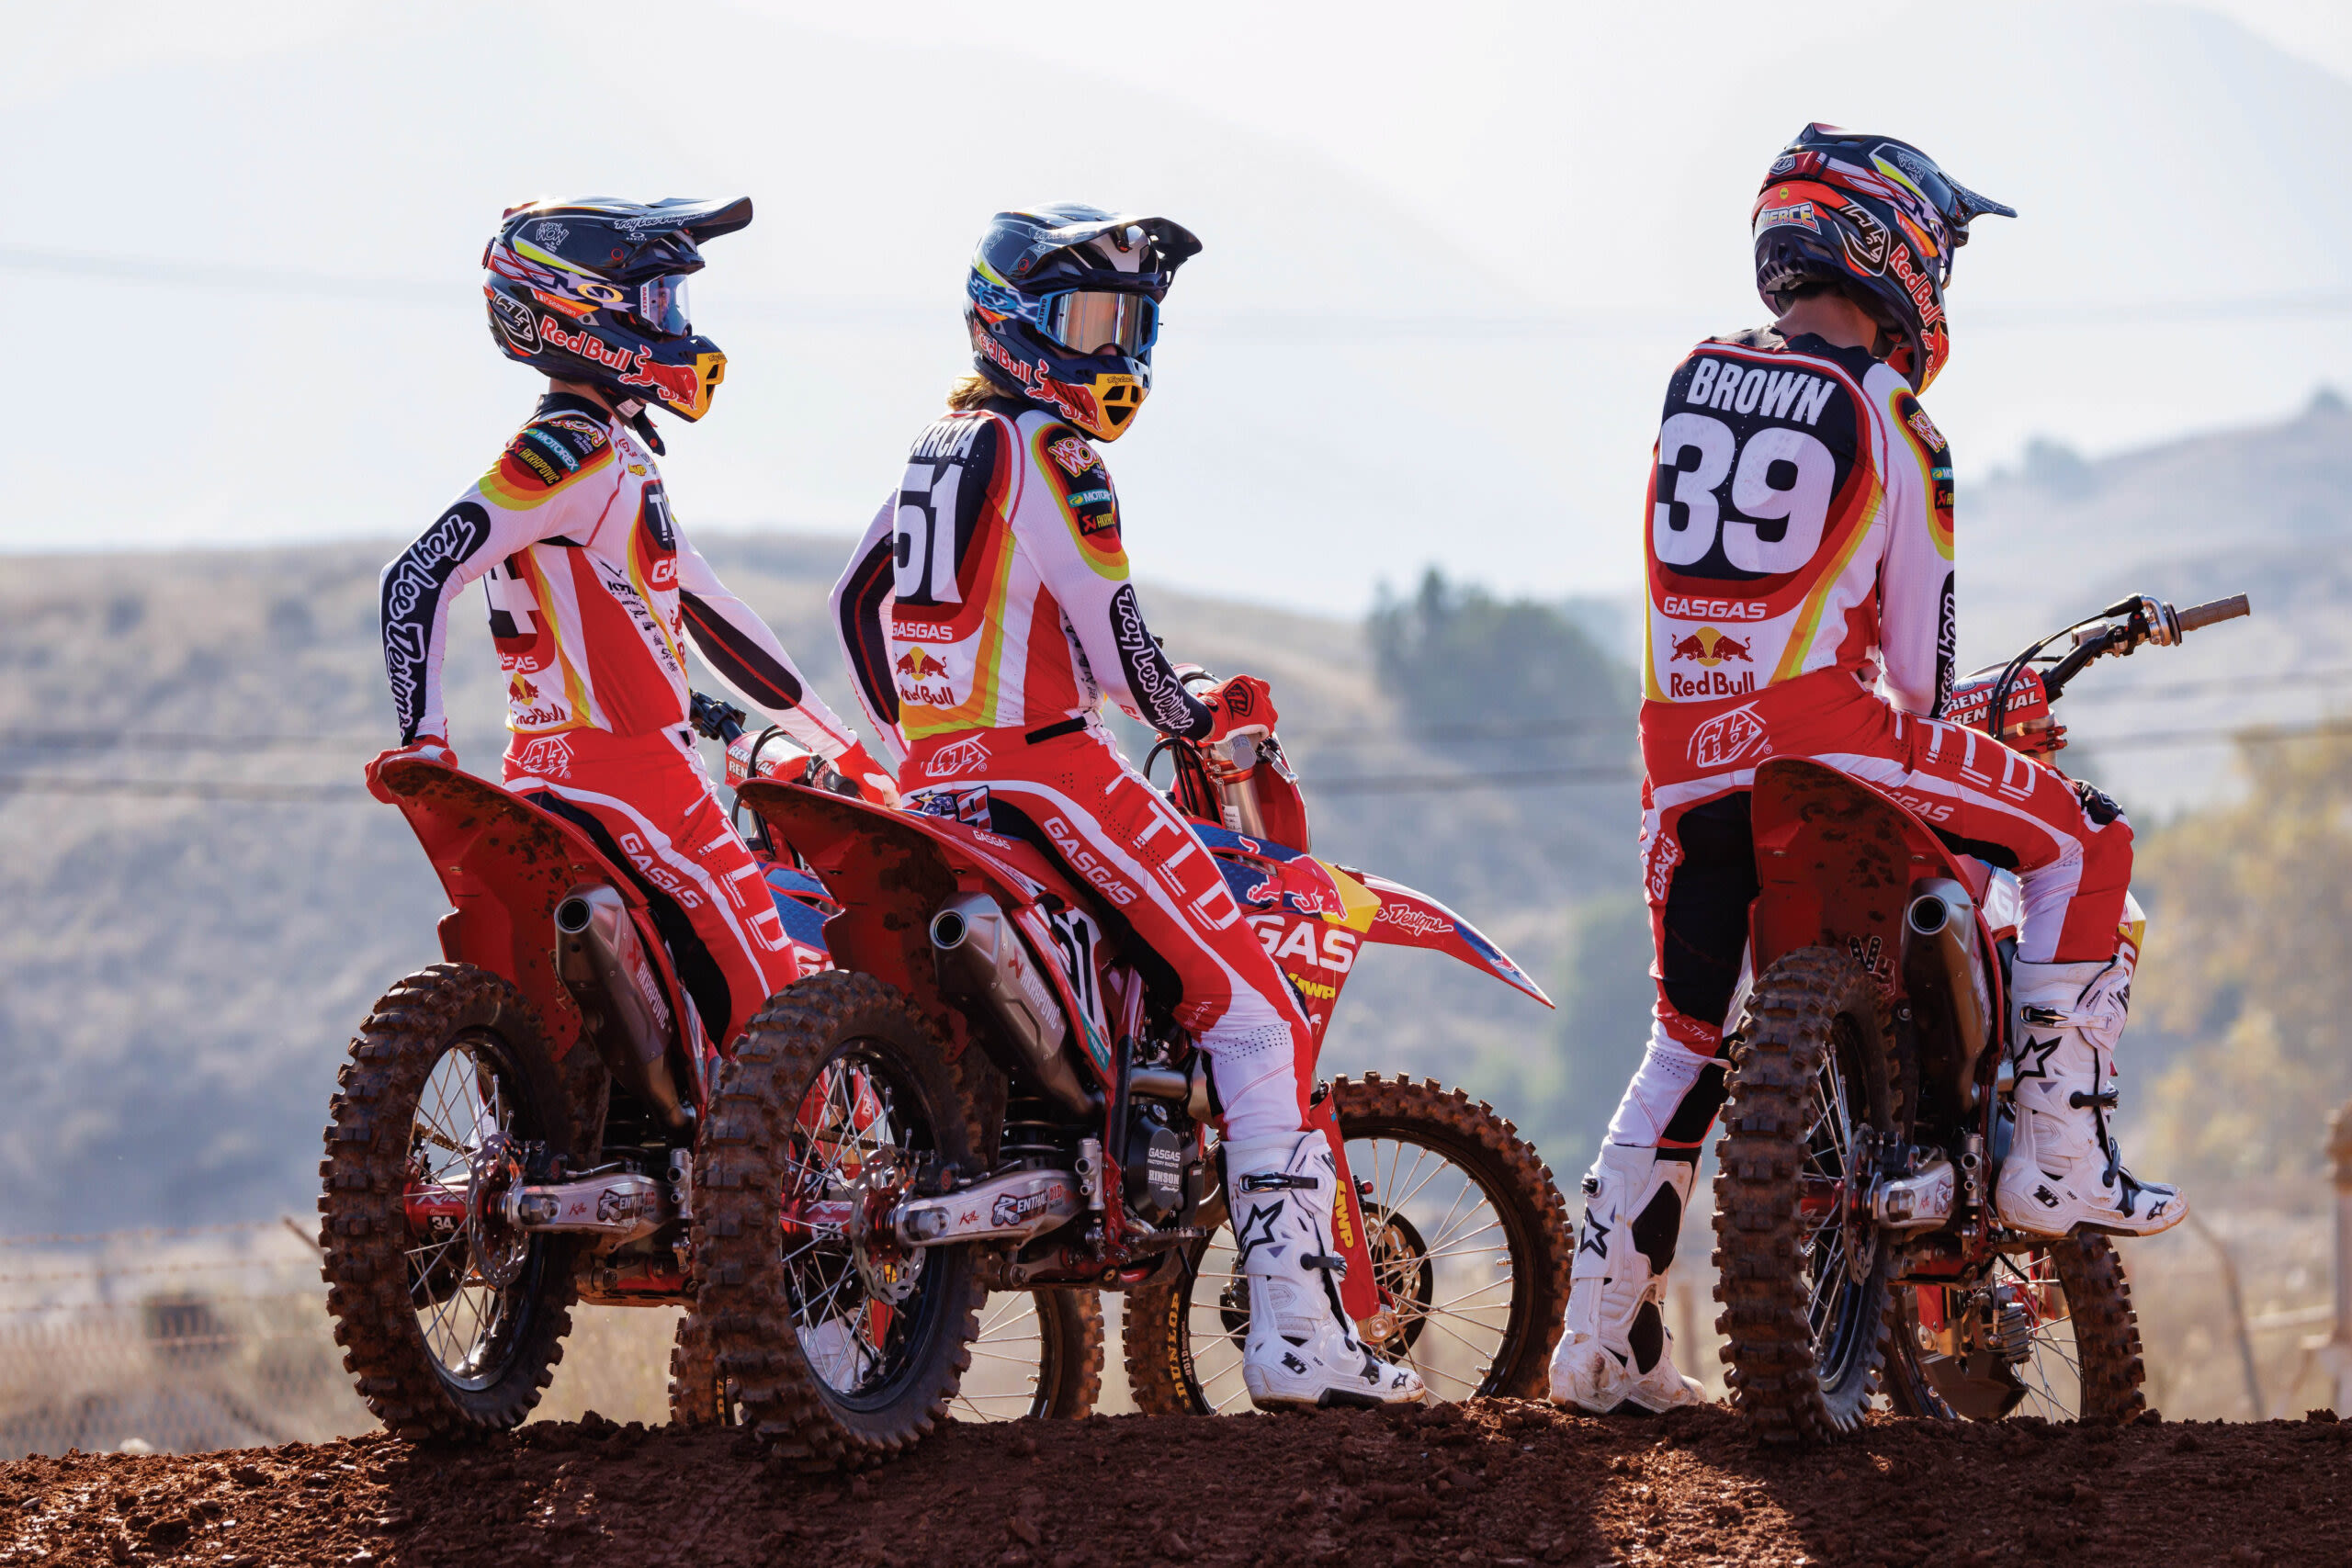 Frank Latham Named Troy Lee Designs GASGAS Factory Racing Team Manager